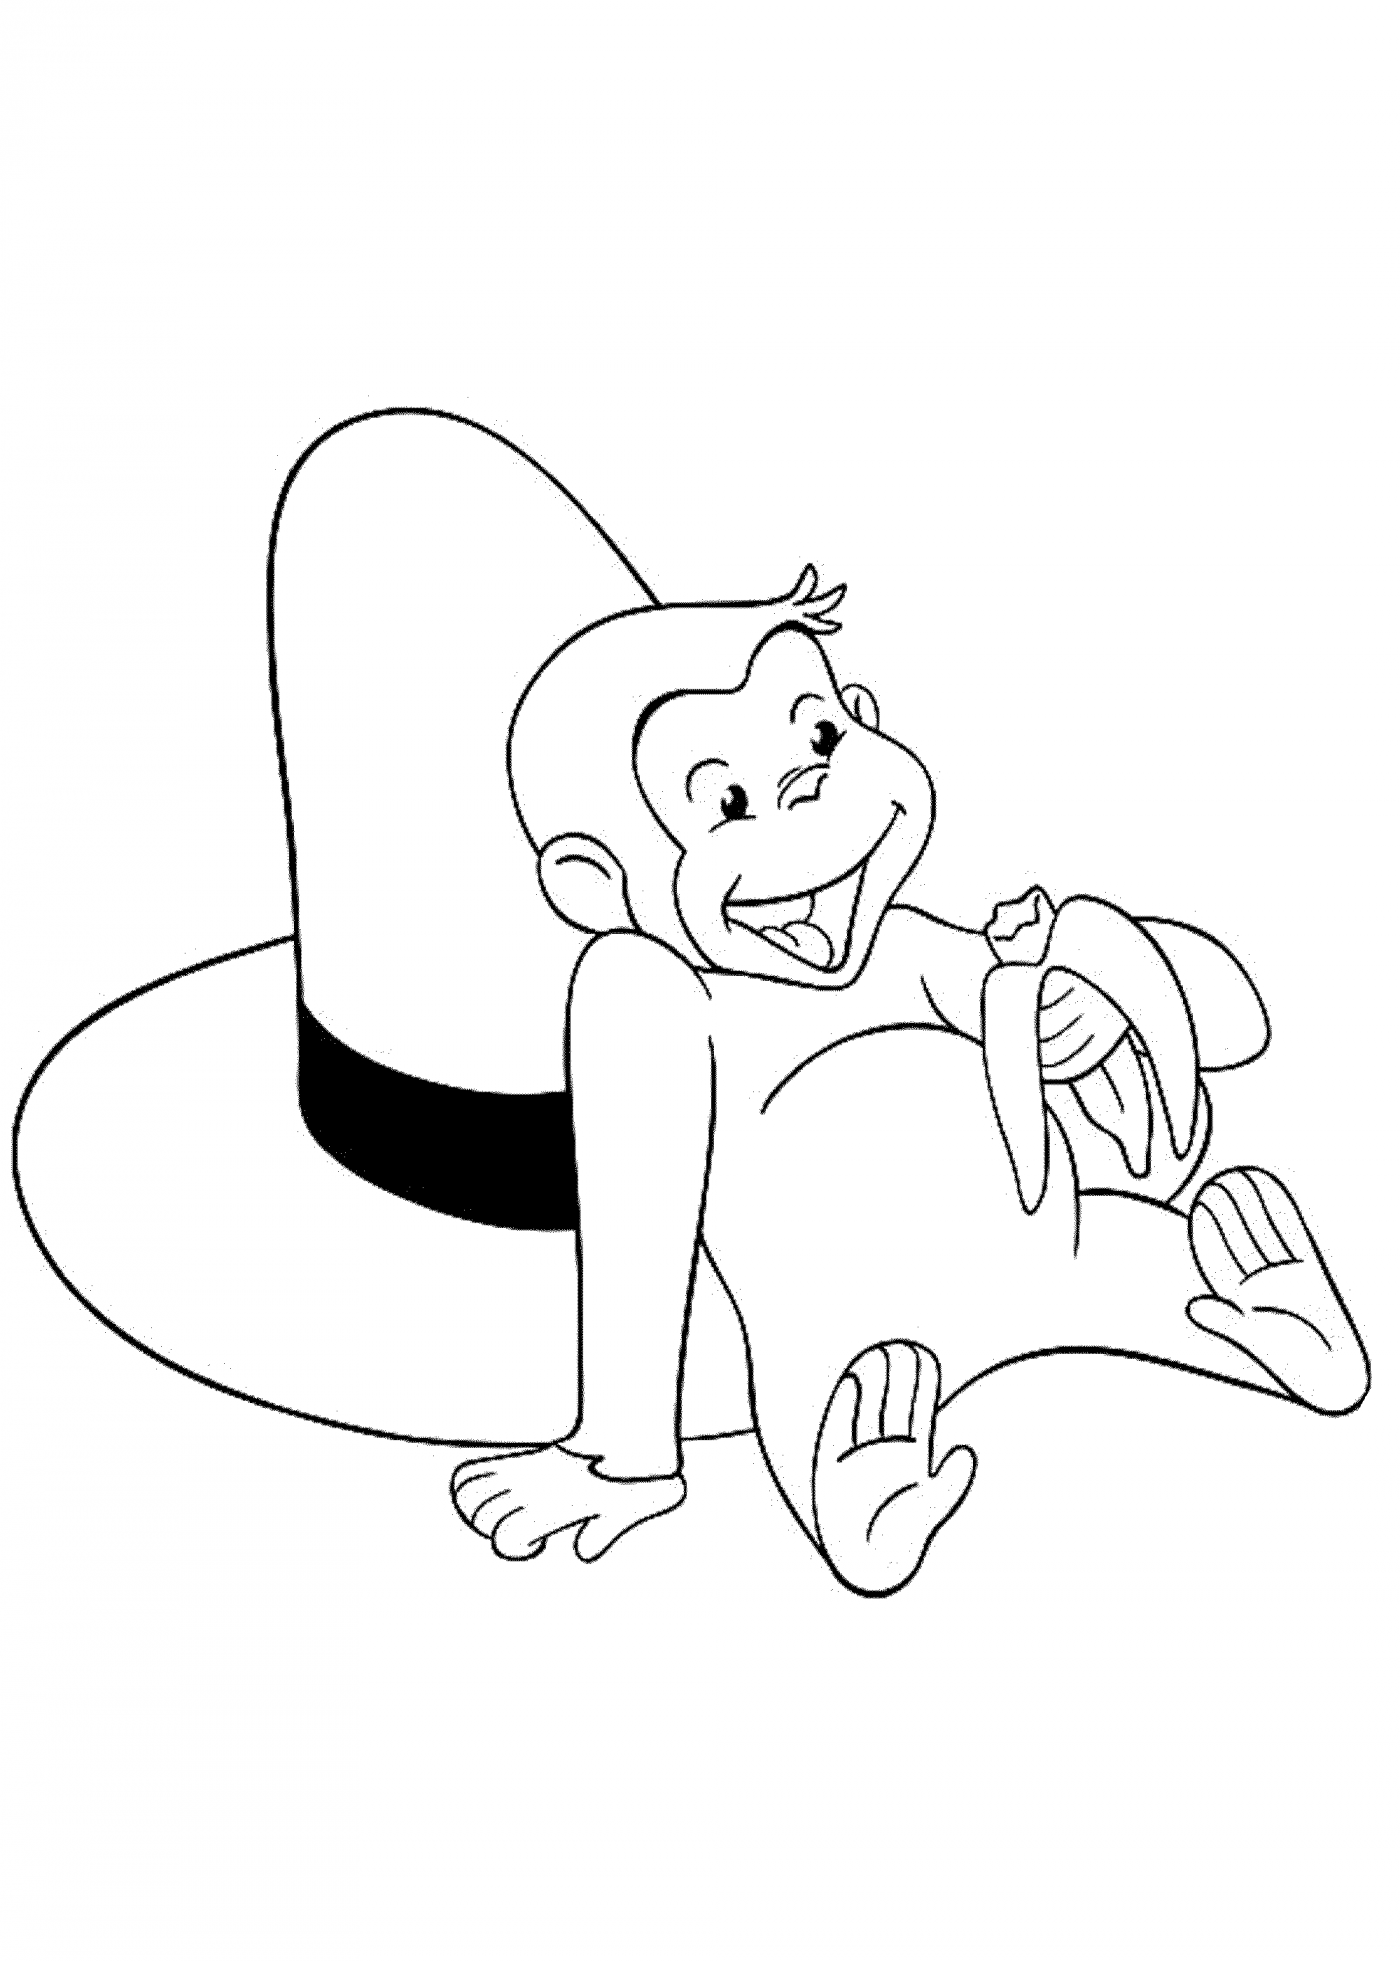 Print & Download - Curious George Coloring Pages to Stimulate Kids